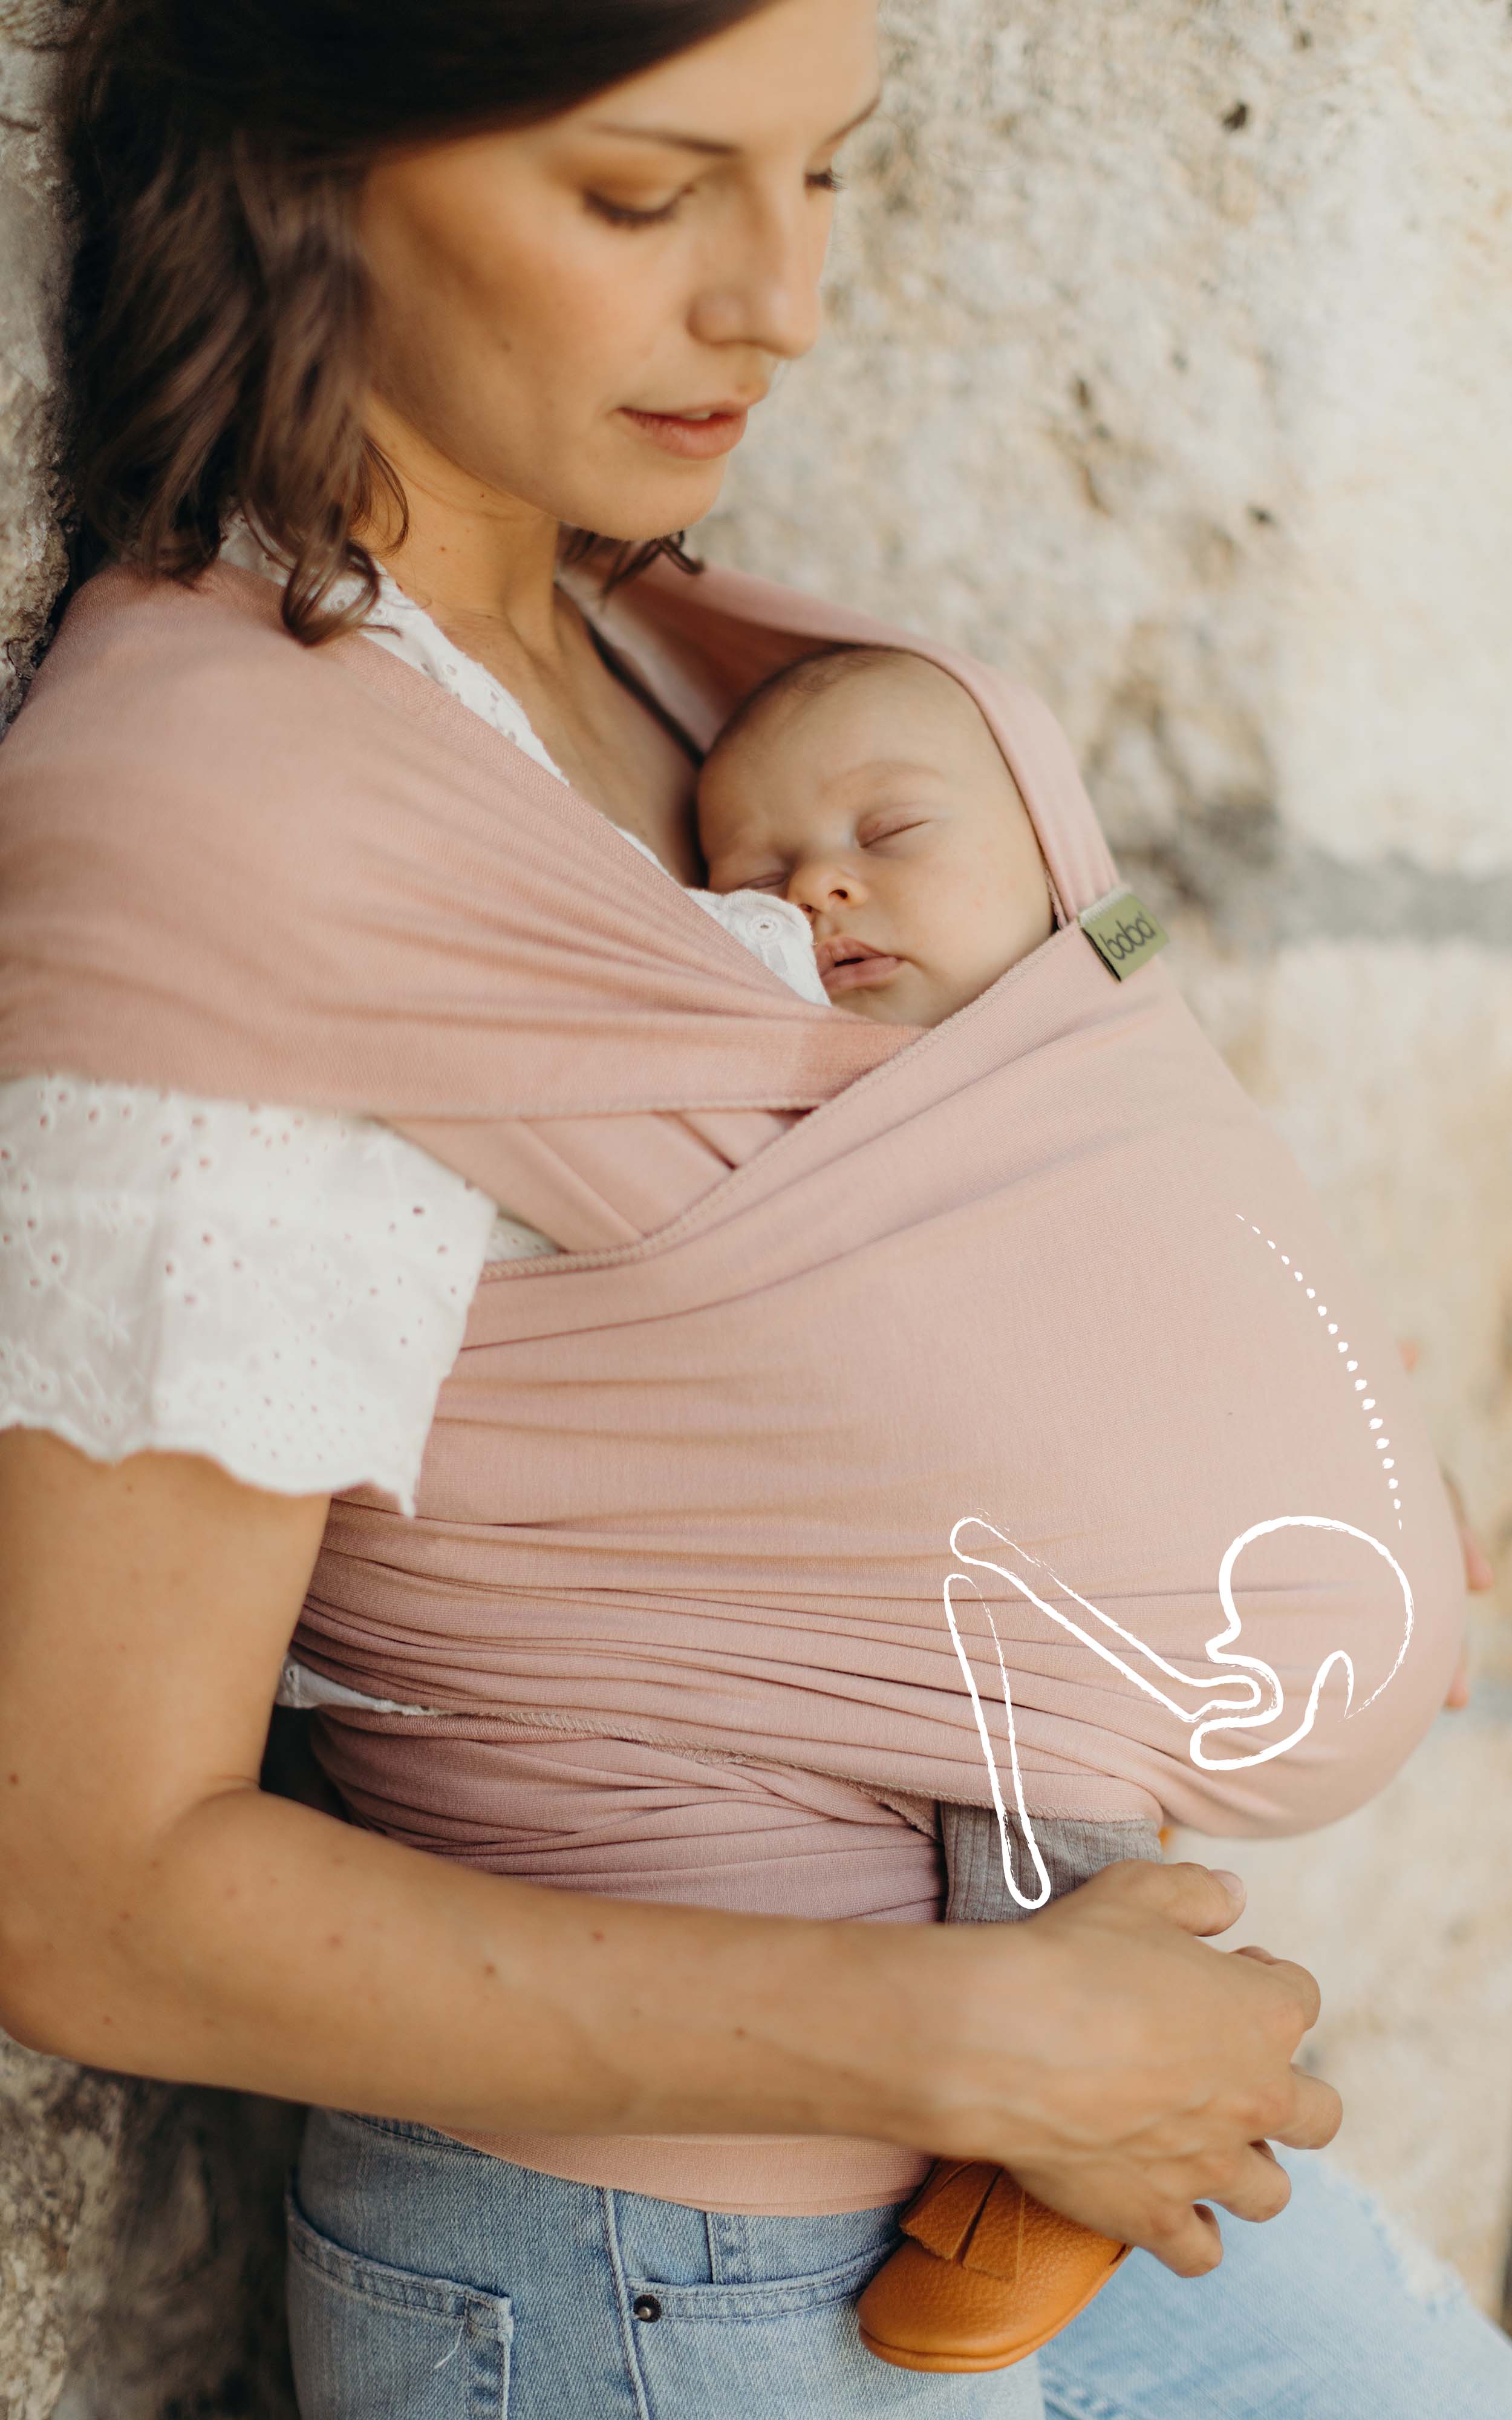 Mom wearing a white lace shirt and jeans has her sleeping baby girl in the bamboo serenity boba wrap. there is a line illustration of the baby's hips and spine in the natural ergonomic position over the photo.